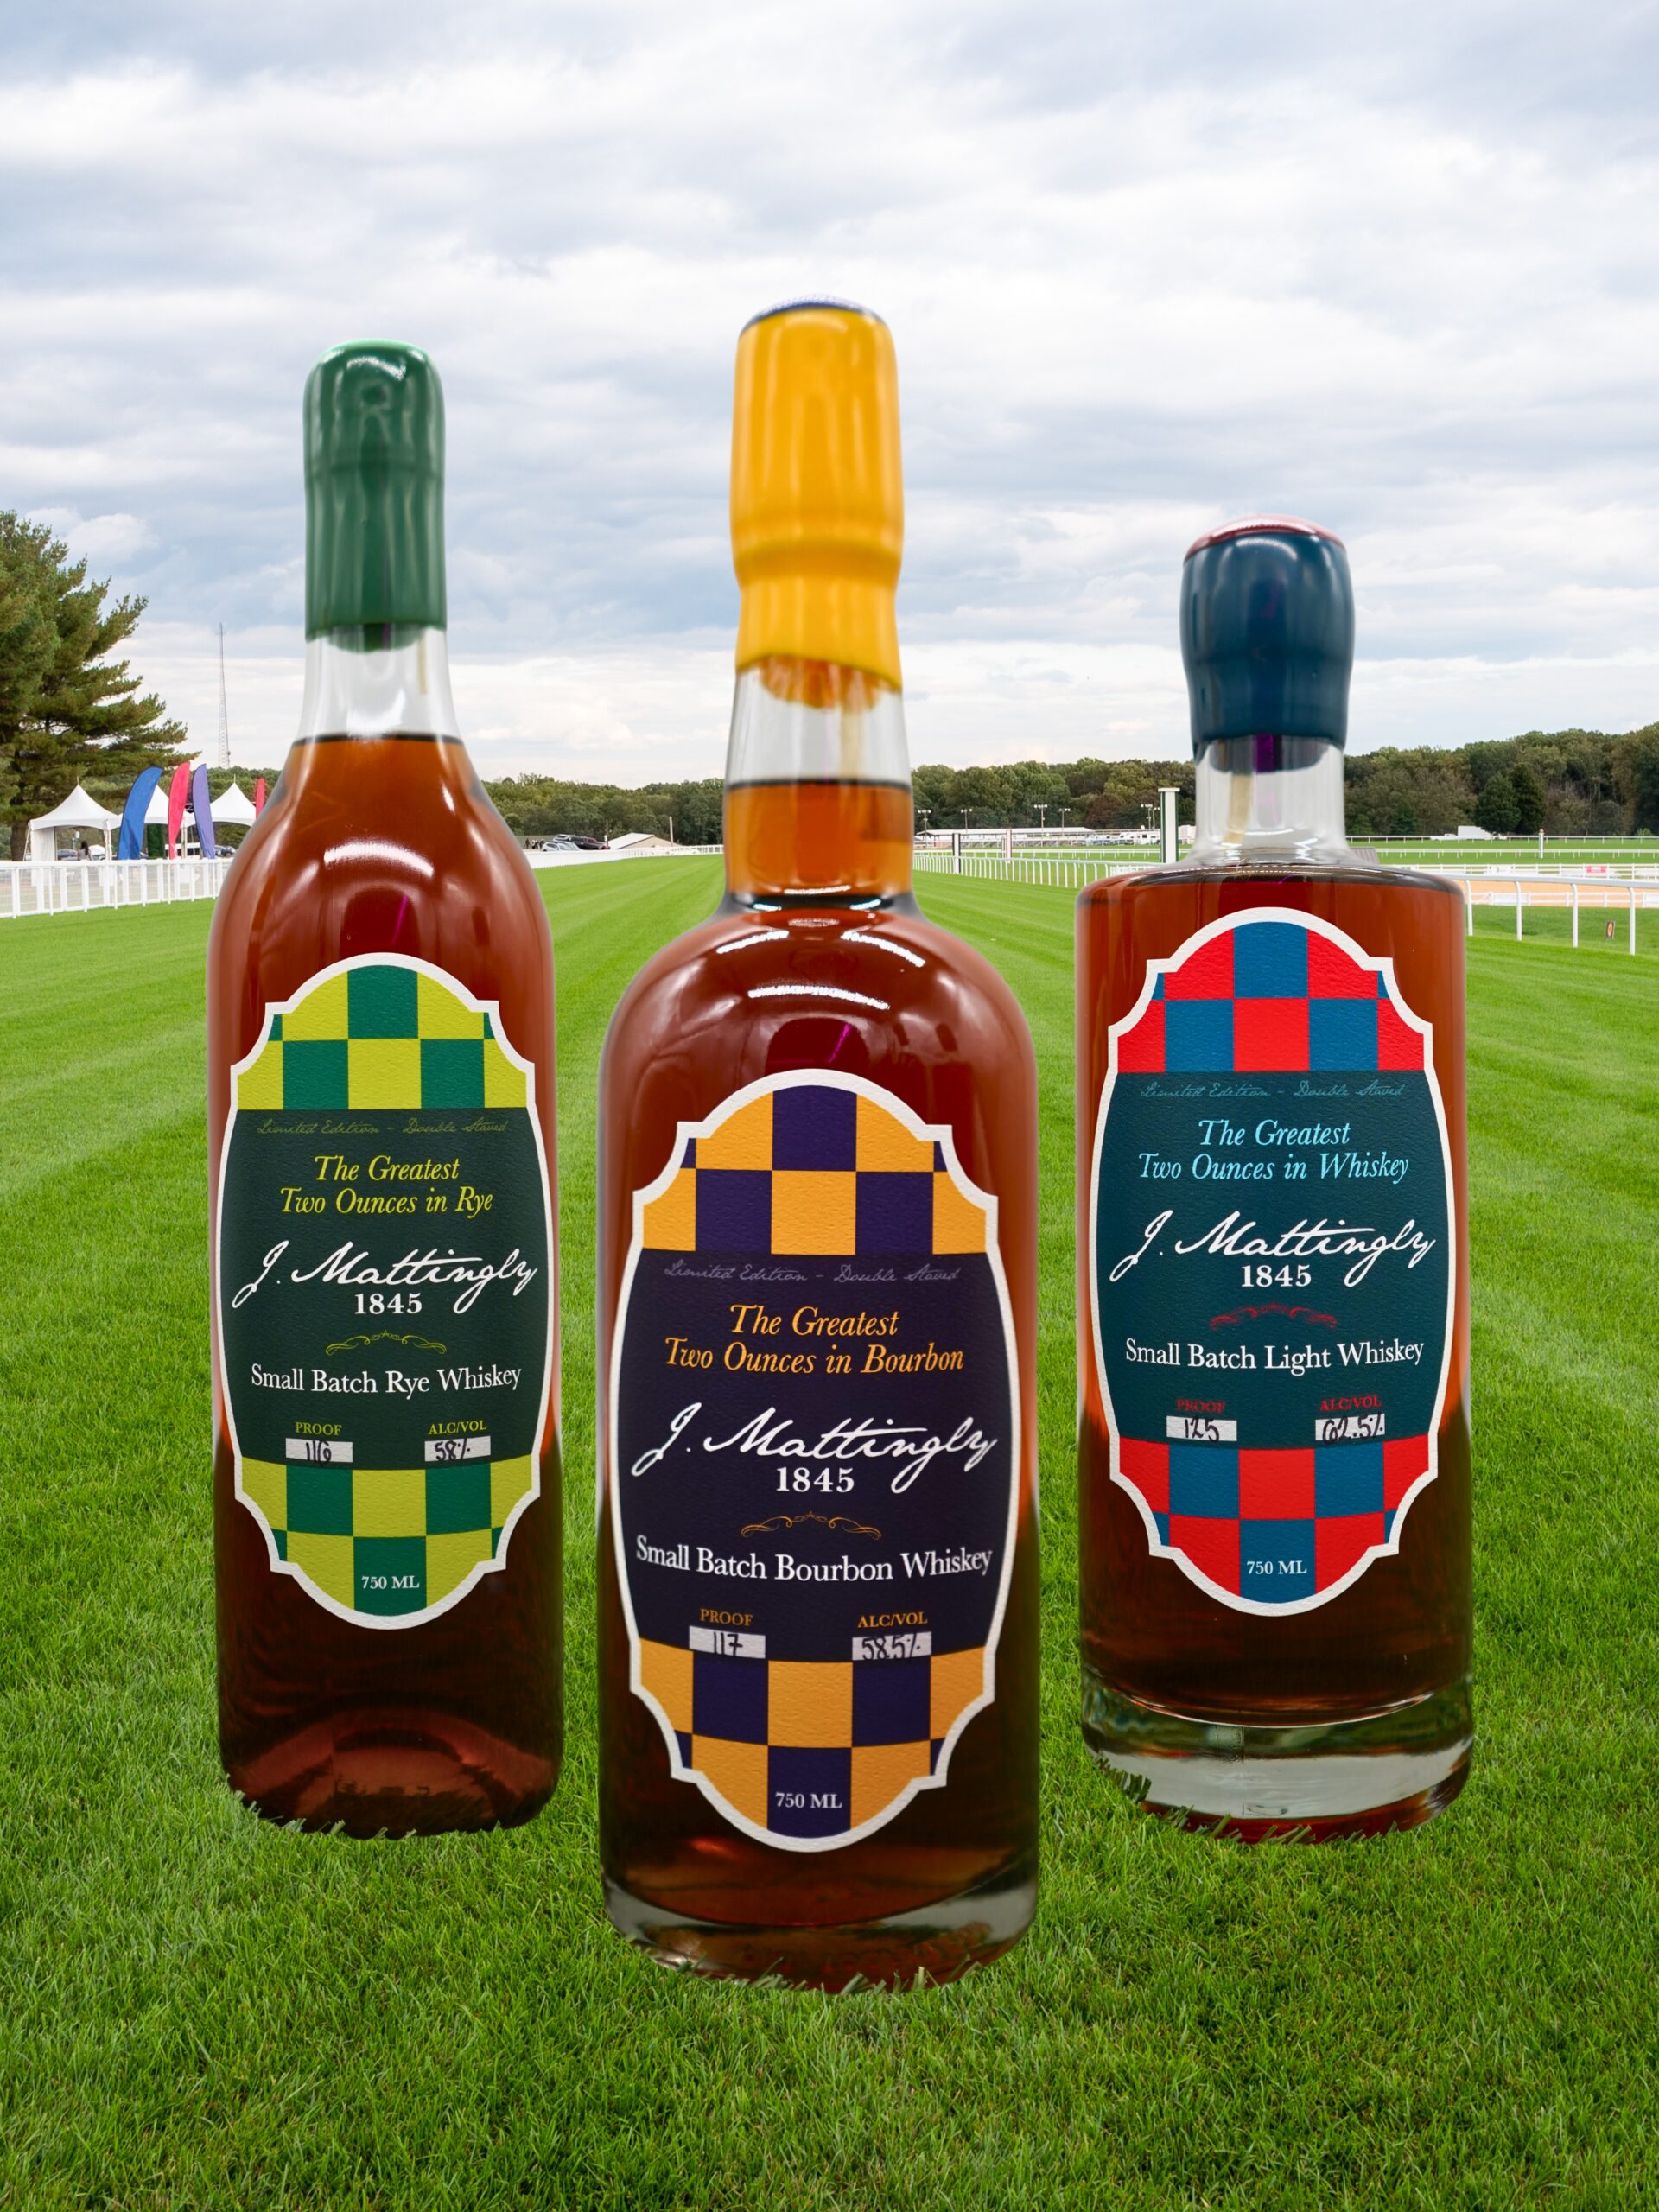 J. Mattingly 1845 Celebrates the Kentucky Derby with 3 New Whiskey Releases